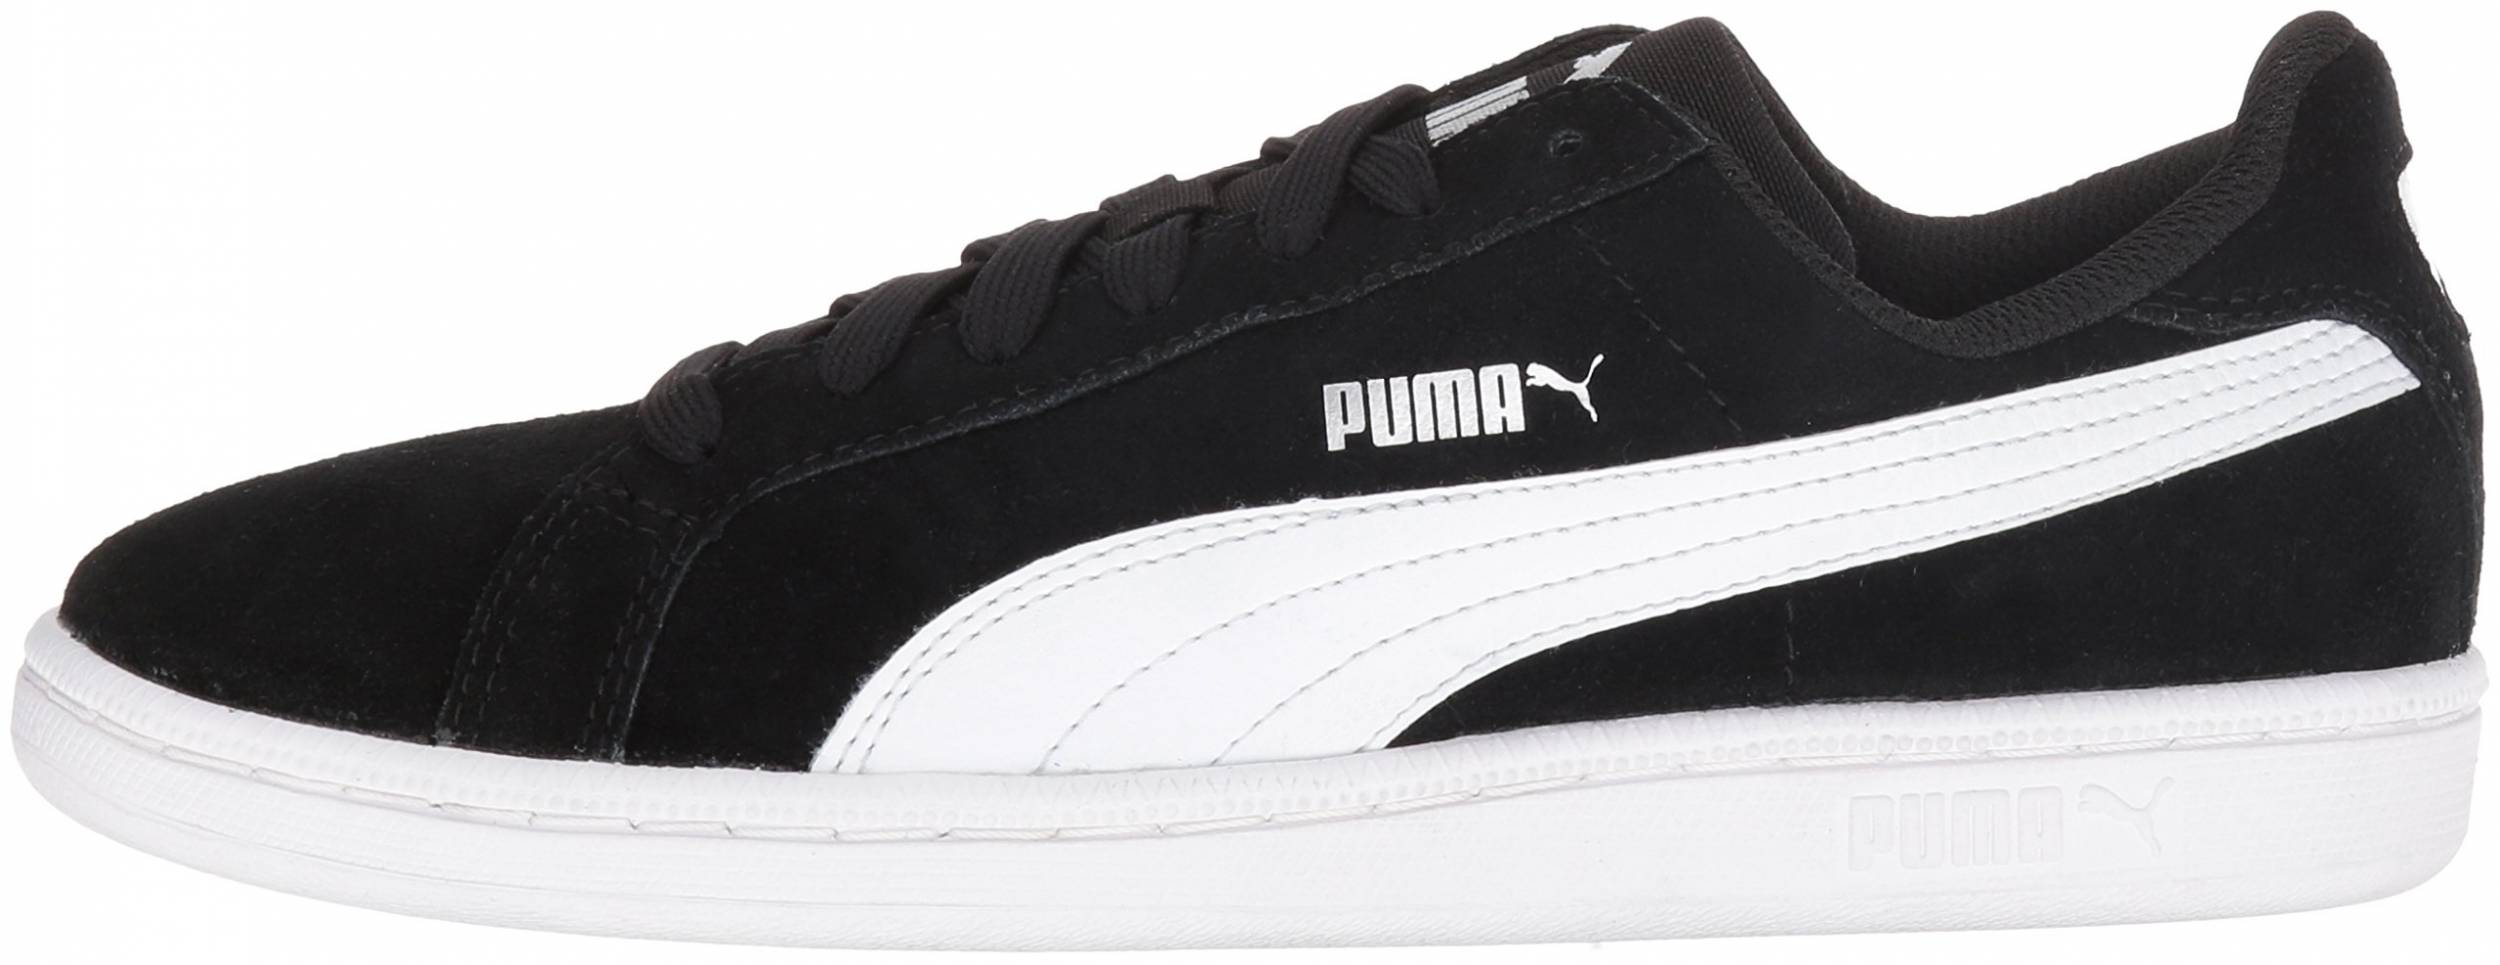 Only $37 + Review of Puma Smash SD 